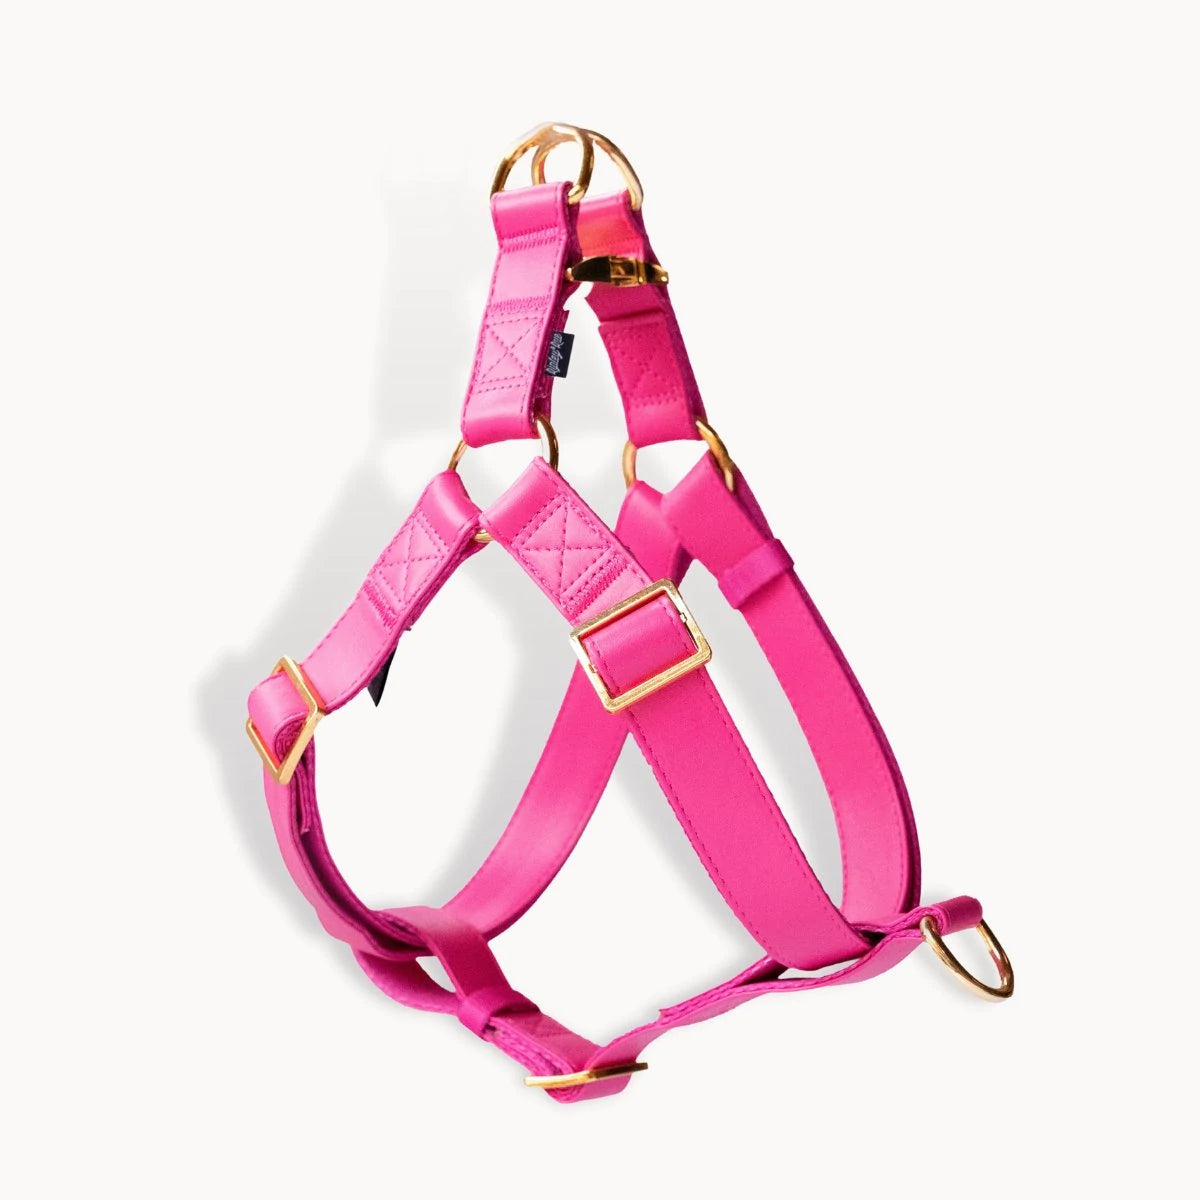 Ripley & Rue - Vegan Leather Dog Harness - Various Colours